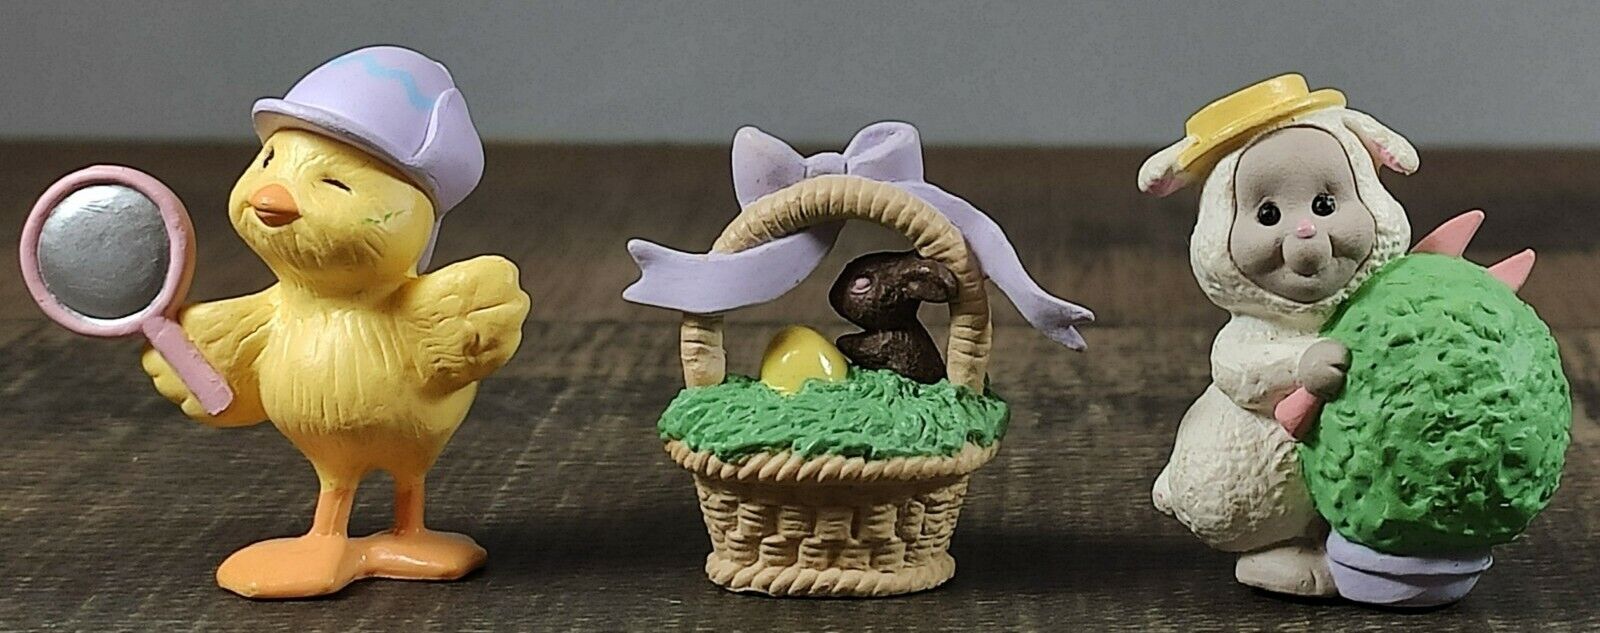 Hallmark Merry Miniatures Easter 1992- Chick, Chocolate Bunny and Lamb